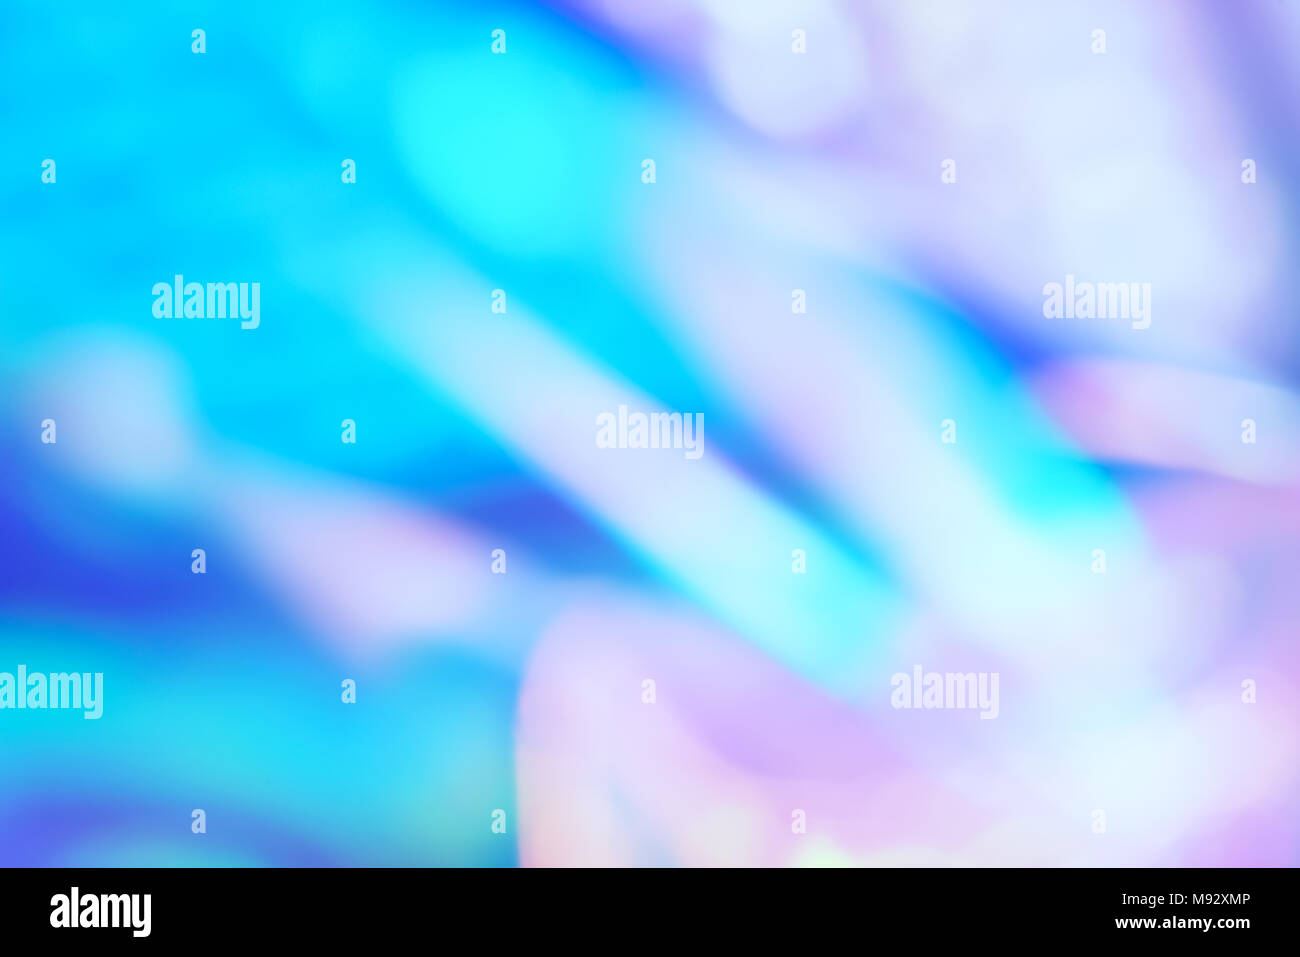 Holographic ultraviolet neon abstract unfocus background with glitch effect. Stock Photo